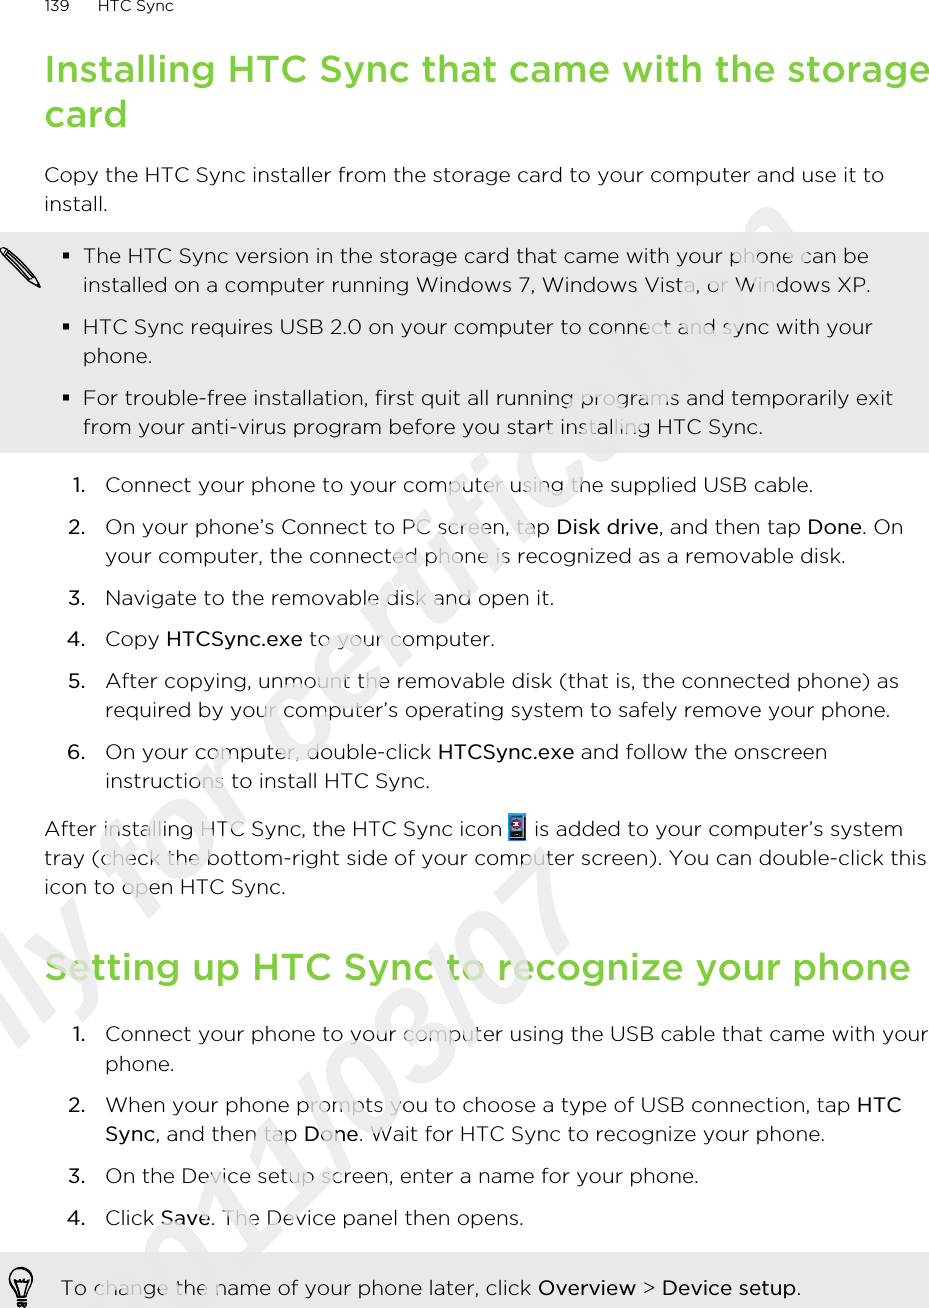 Installing HTC Sync that came with the storagecardCopy the HTC Sync installer from the storage card to your computer and use it toinstall.§The HTC Sync version in the storage card that came with your phone can beinstalled on a computer running Windows 7, Windows Vista, or Windows XP.§HTC Sync requires USB 2.0 on your computer to connect and sync with yourphone.§For trouble-free installation, first quit all running programs and temporarily exitfrom your anti-virus program before you start installing HTC Sync.1. Connect your phone to your computer using the supplied USB cable.2. On your phone’s Connect to PC screen, tap Disk drive, and then tap Done. Onyour computer, the connected phone is recognized as a removable disk.3. Navigate to the removable disk and open it.4. Copy HTCSync.exe to your computer.5. After copying, unmount the removable disk (that is, the connected phone) asrequired by your computer’s operating system to safely remove your phone.6. On your computer, double-click HTCSync.exe and follow the onscreeninstructions to install HTC Sync.After installing HTC Sync, the HTC Sync icon   is added to your computer’s systemtray (check the bottom-right side of your computer screen). You can double-click thisicon to open HTC Sync.Setting up HTC Sync to recognize your phone1. Connect your phone to your computer using the USB cable that came with yourphone.2. When your phone prompts you to choose a type of USB connection, tap HTCSync, and then tap Done. Wait for HTC Sync to recognize your phone.3. On the Device setup screen, enter a name for your phone.4. Click Save. The Device panel then opens.To change the name of your phone later, click Overview &gt; Device setup.139 HTC SyncOnly for certification  2011/03/07